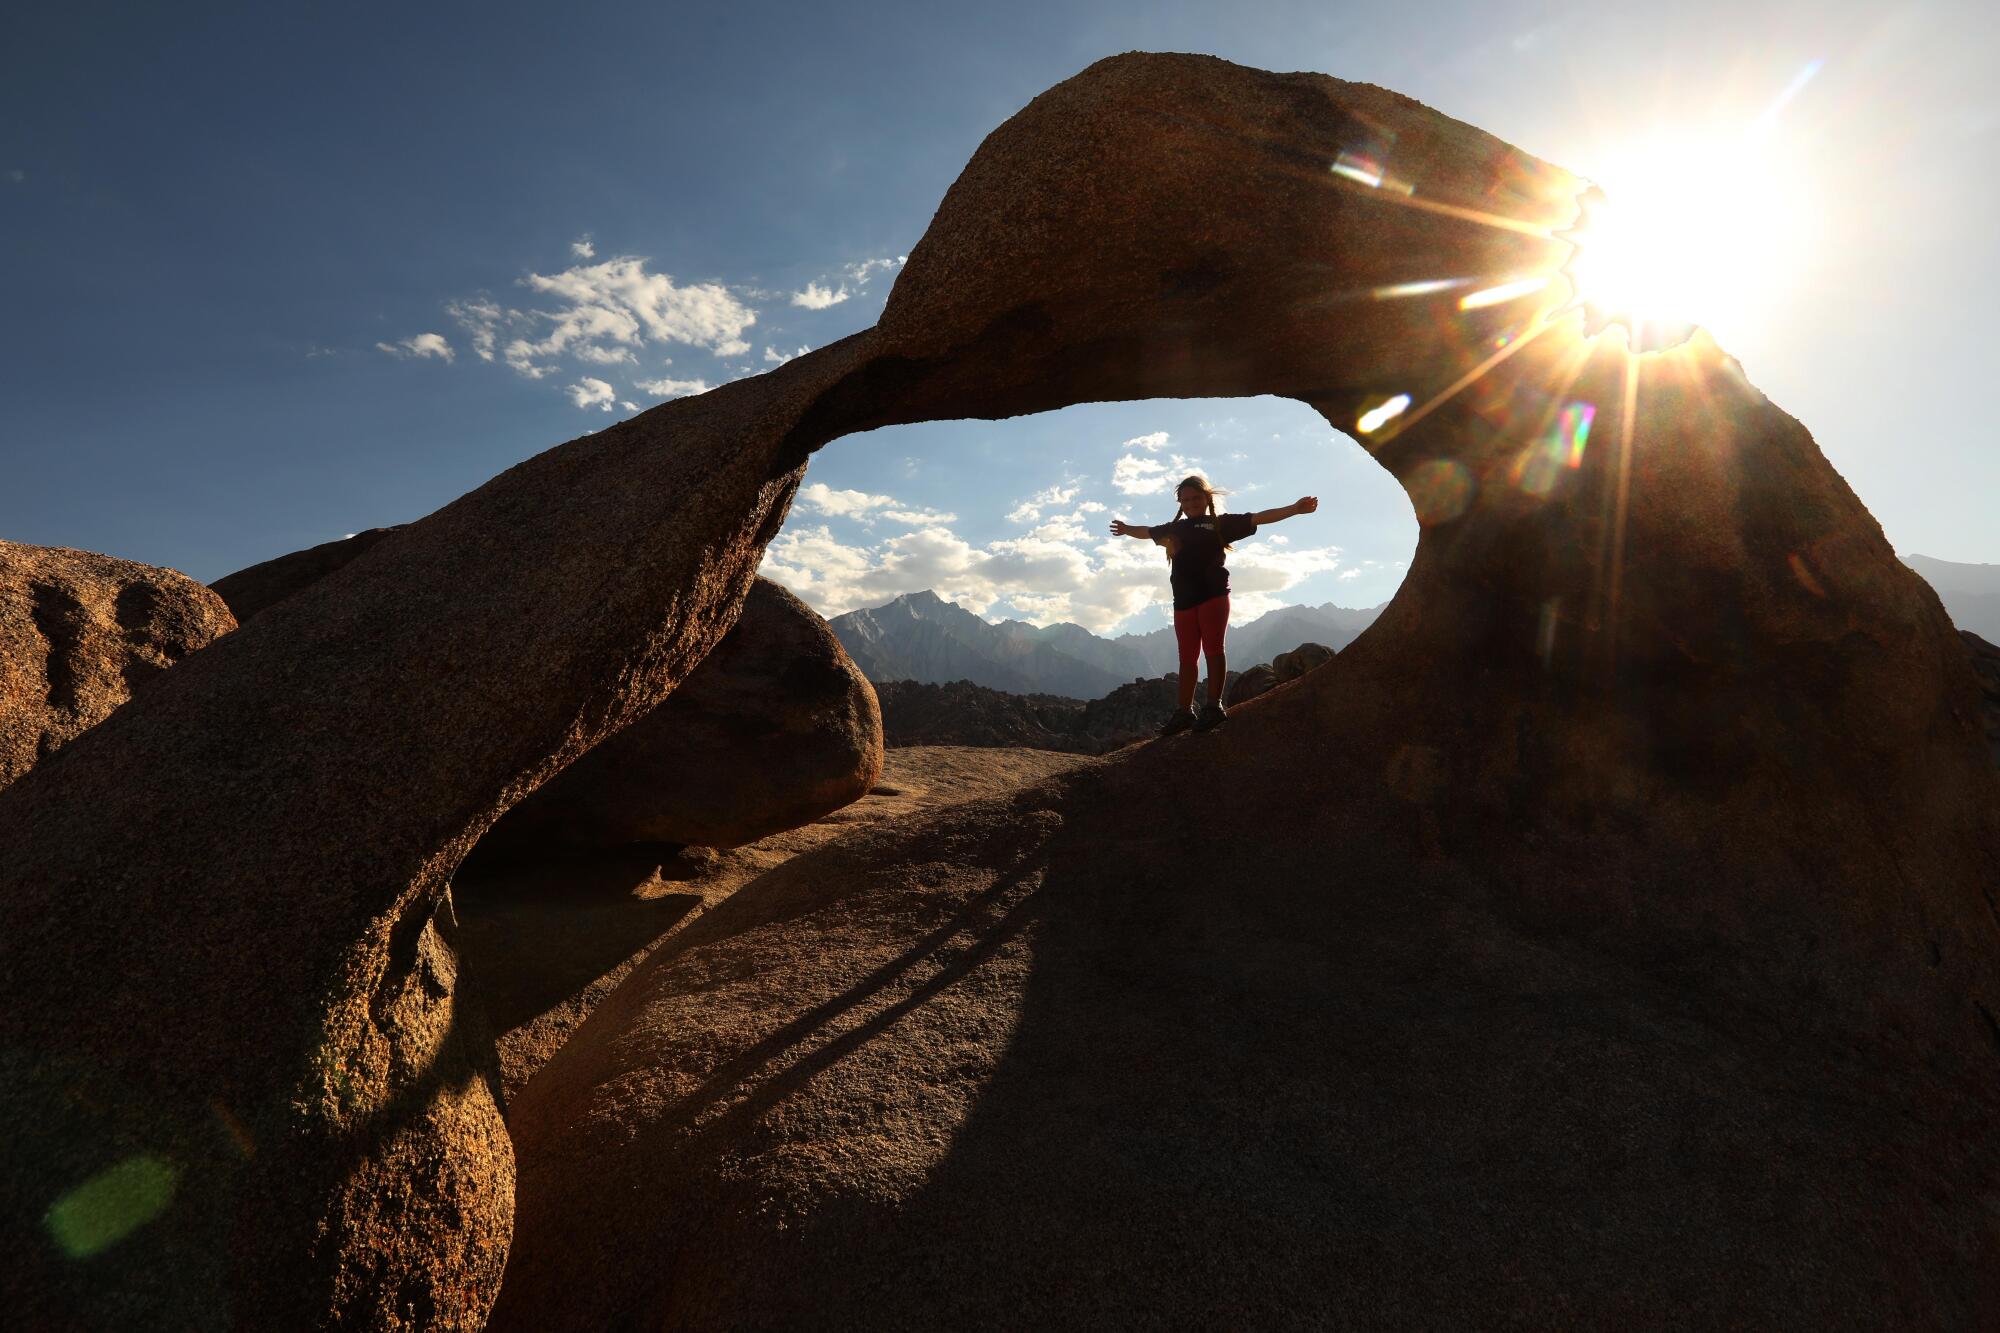 Charlie Heller, 7, of Simi Valley is framed by the Mobius Arch which is part of Alabama Hills National Scenic Area.